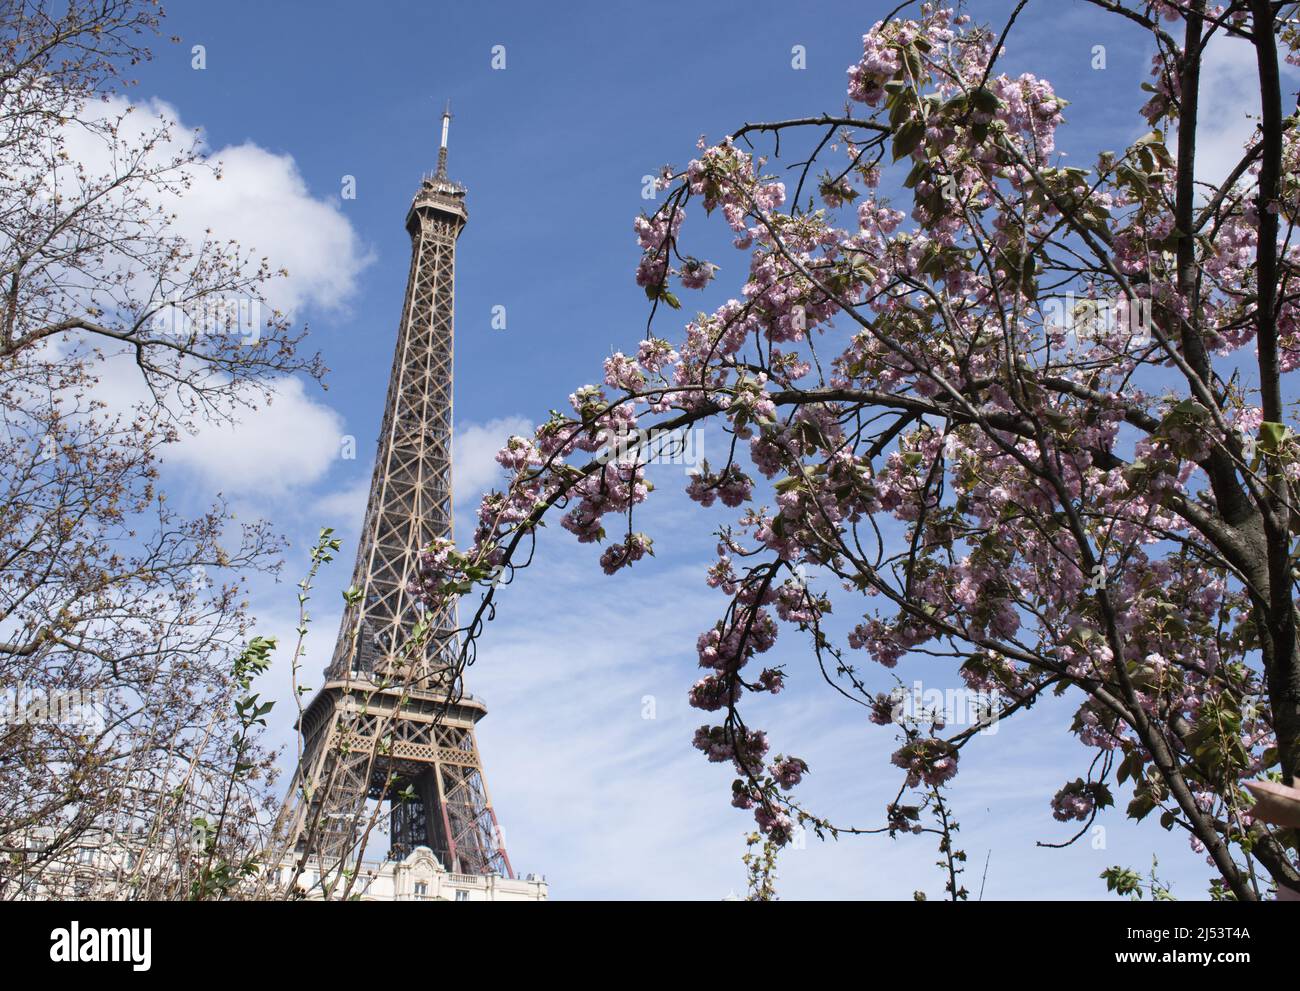 Paris, France, Europe: a Japanese cherry tree in bloom with view of the Eiffel Tower, metal tower completed in 1889 for the Universal Exposition Stock Photo